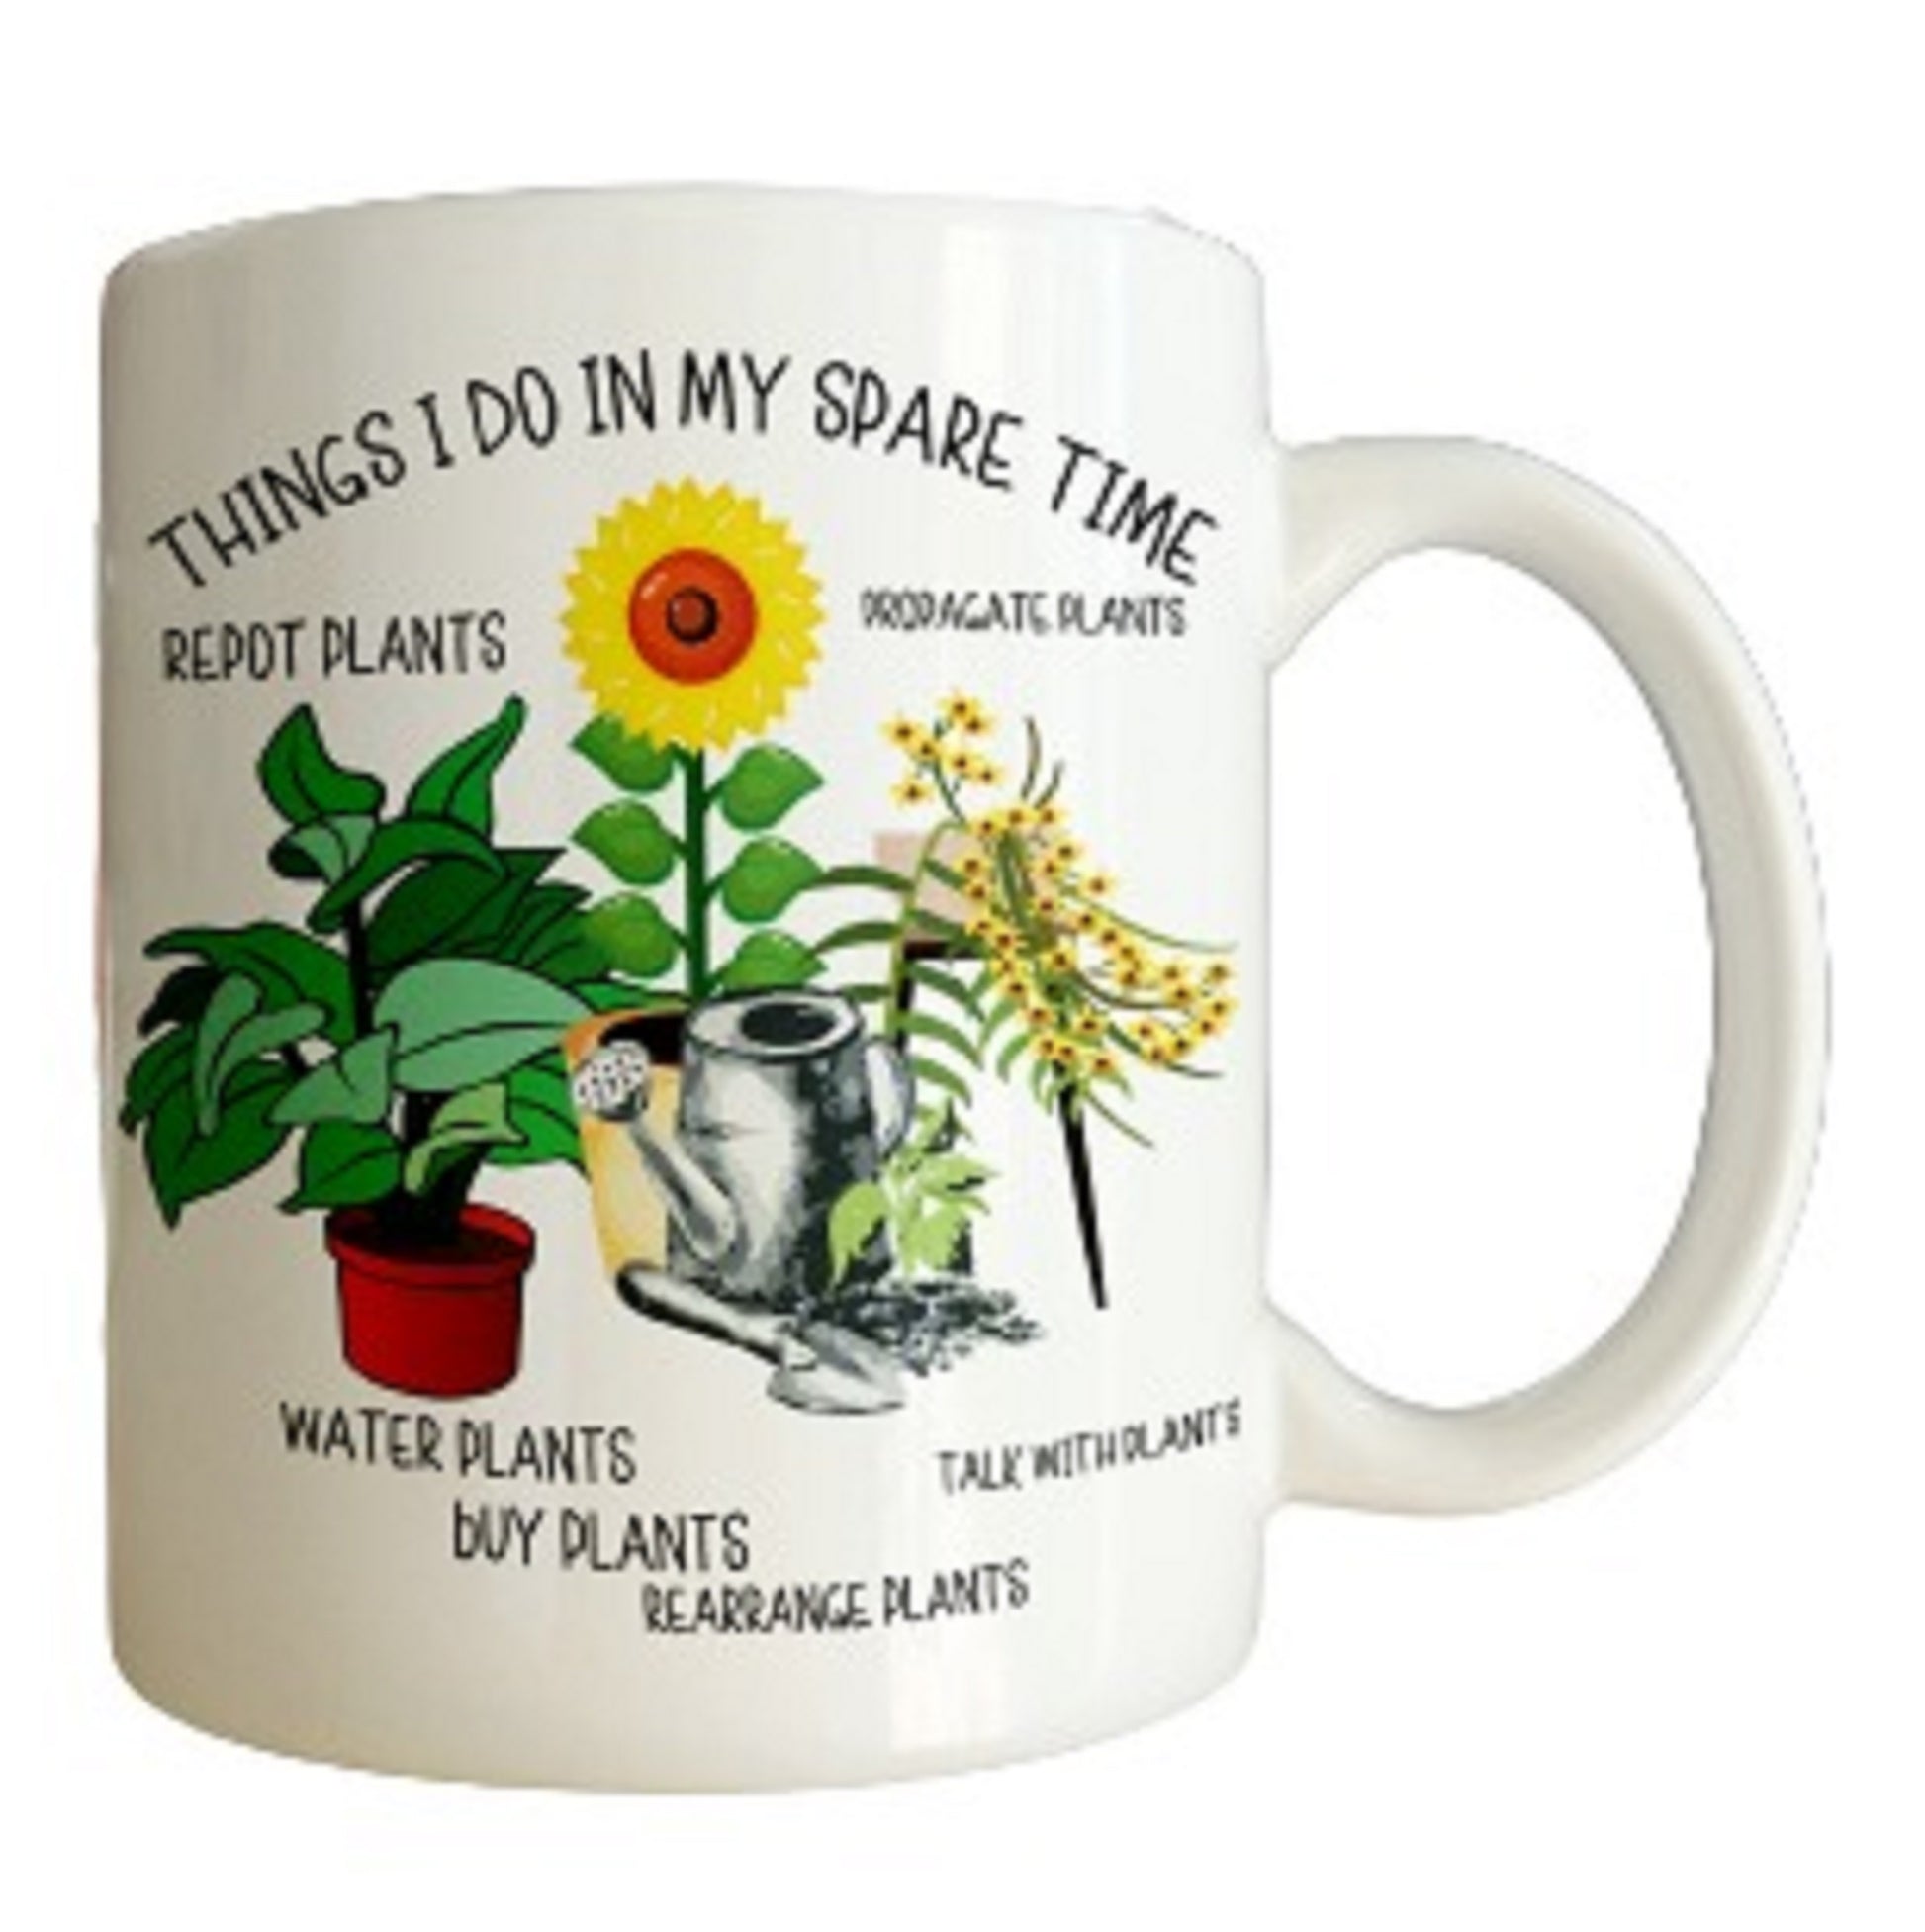  Things To Do In My Spare Time Gardening Mug by Free Spirit Accessories sold by Free Spirit Accessories